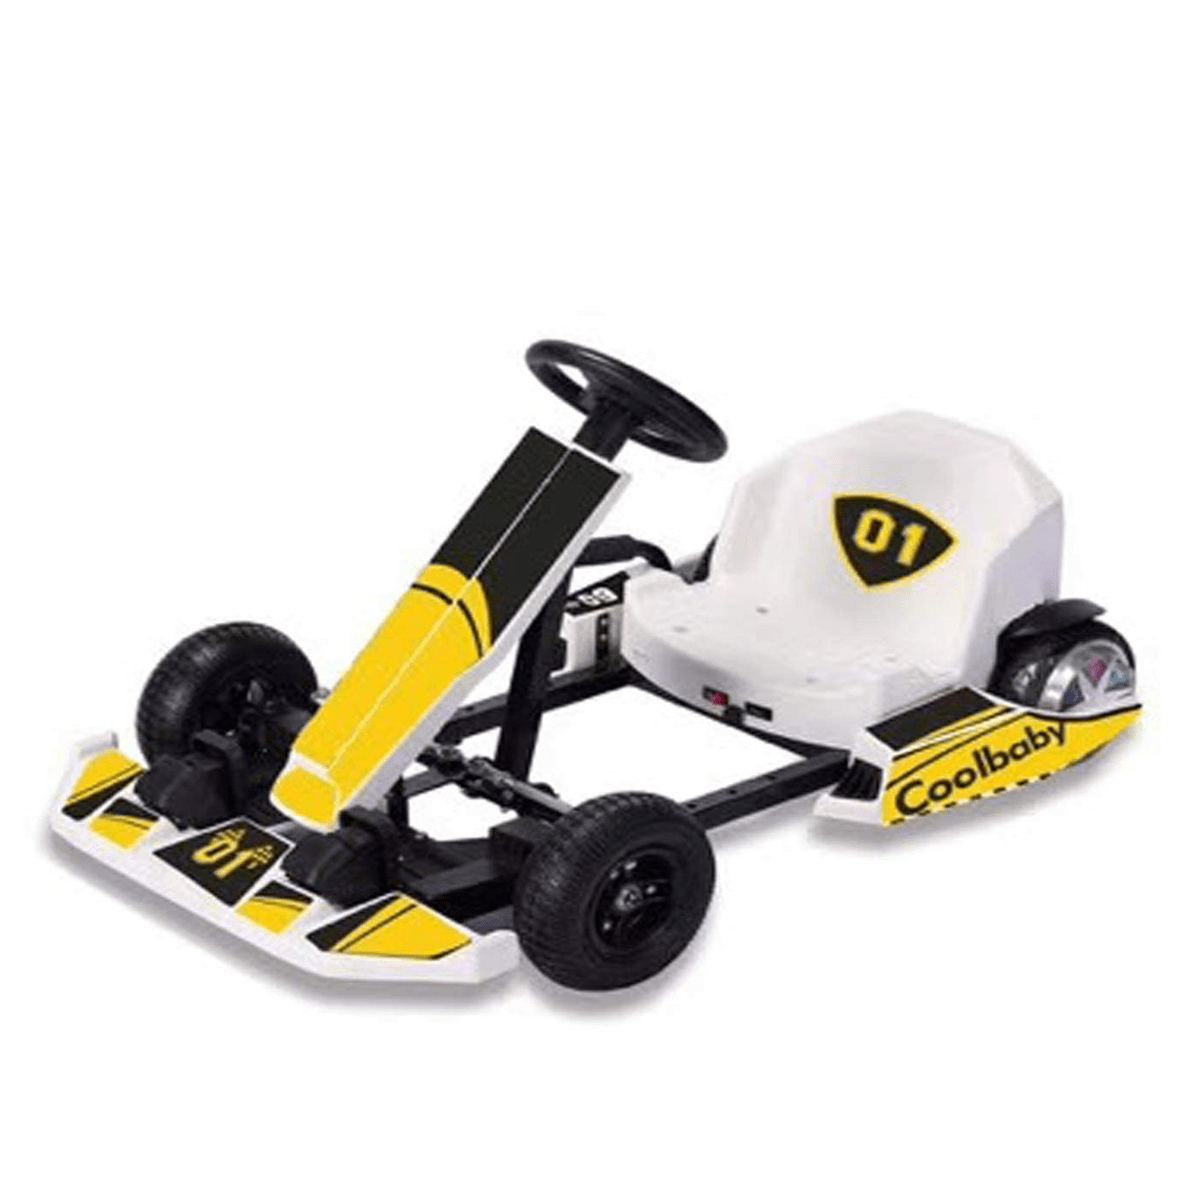 Crazy Drift Electric Scooter Go Cart Kating Car